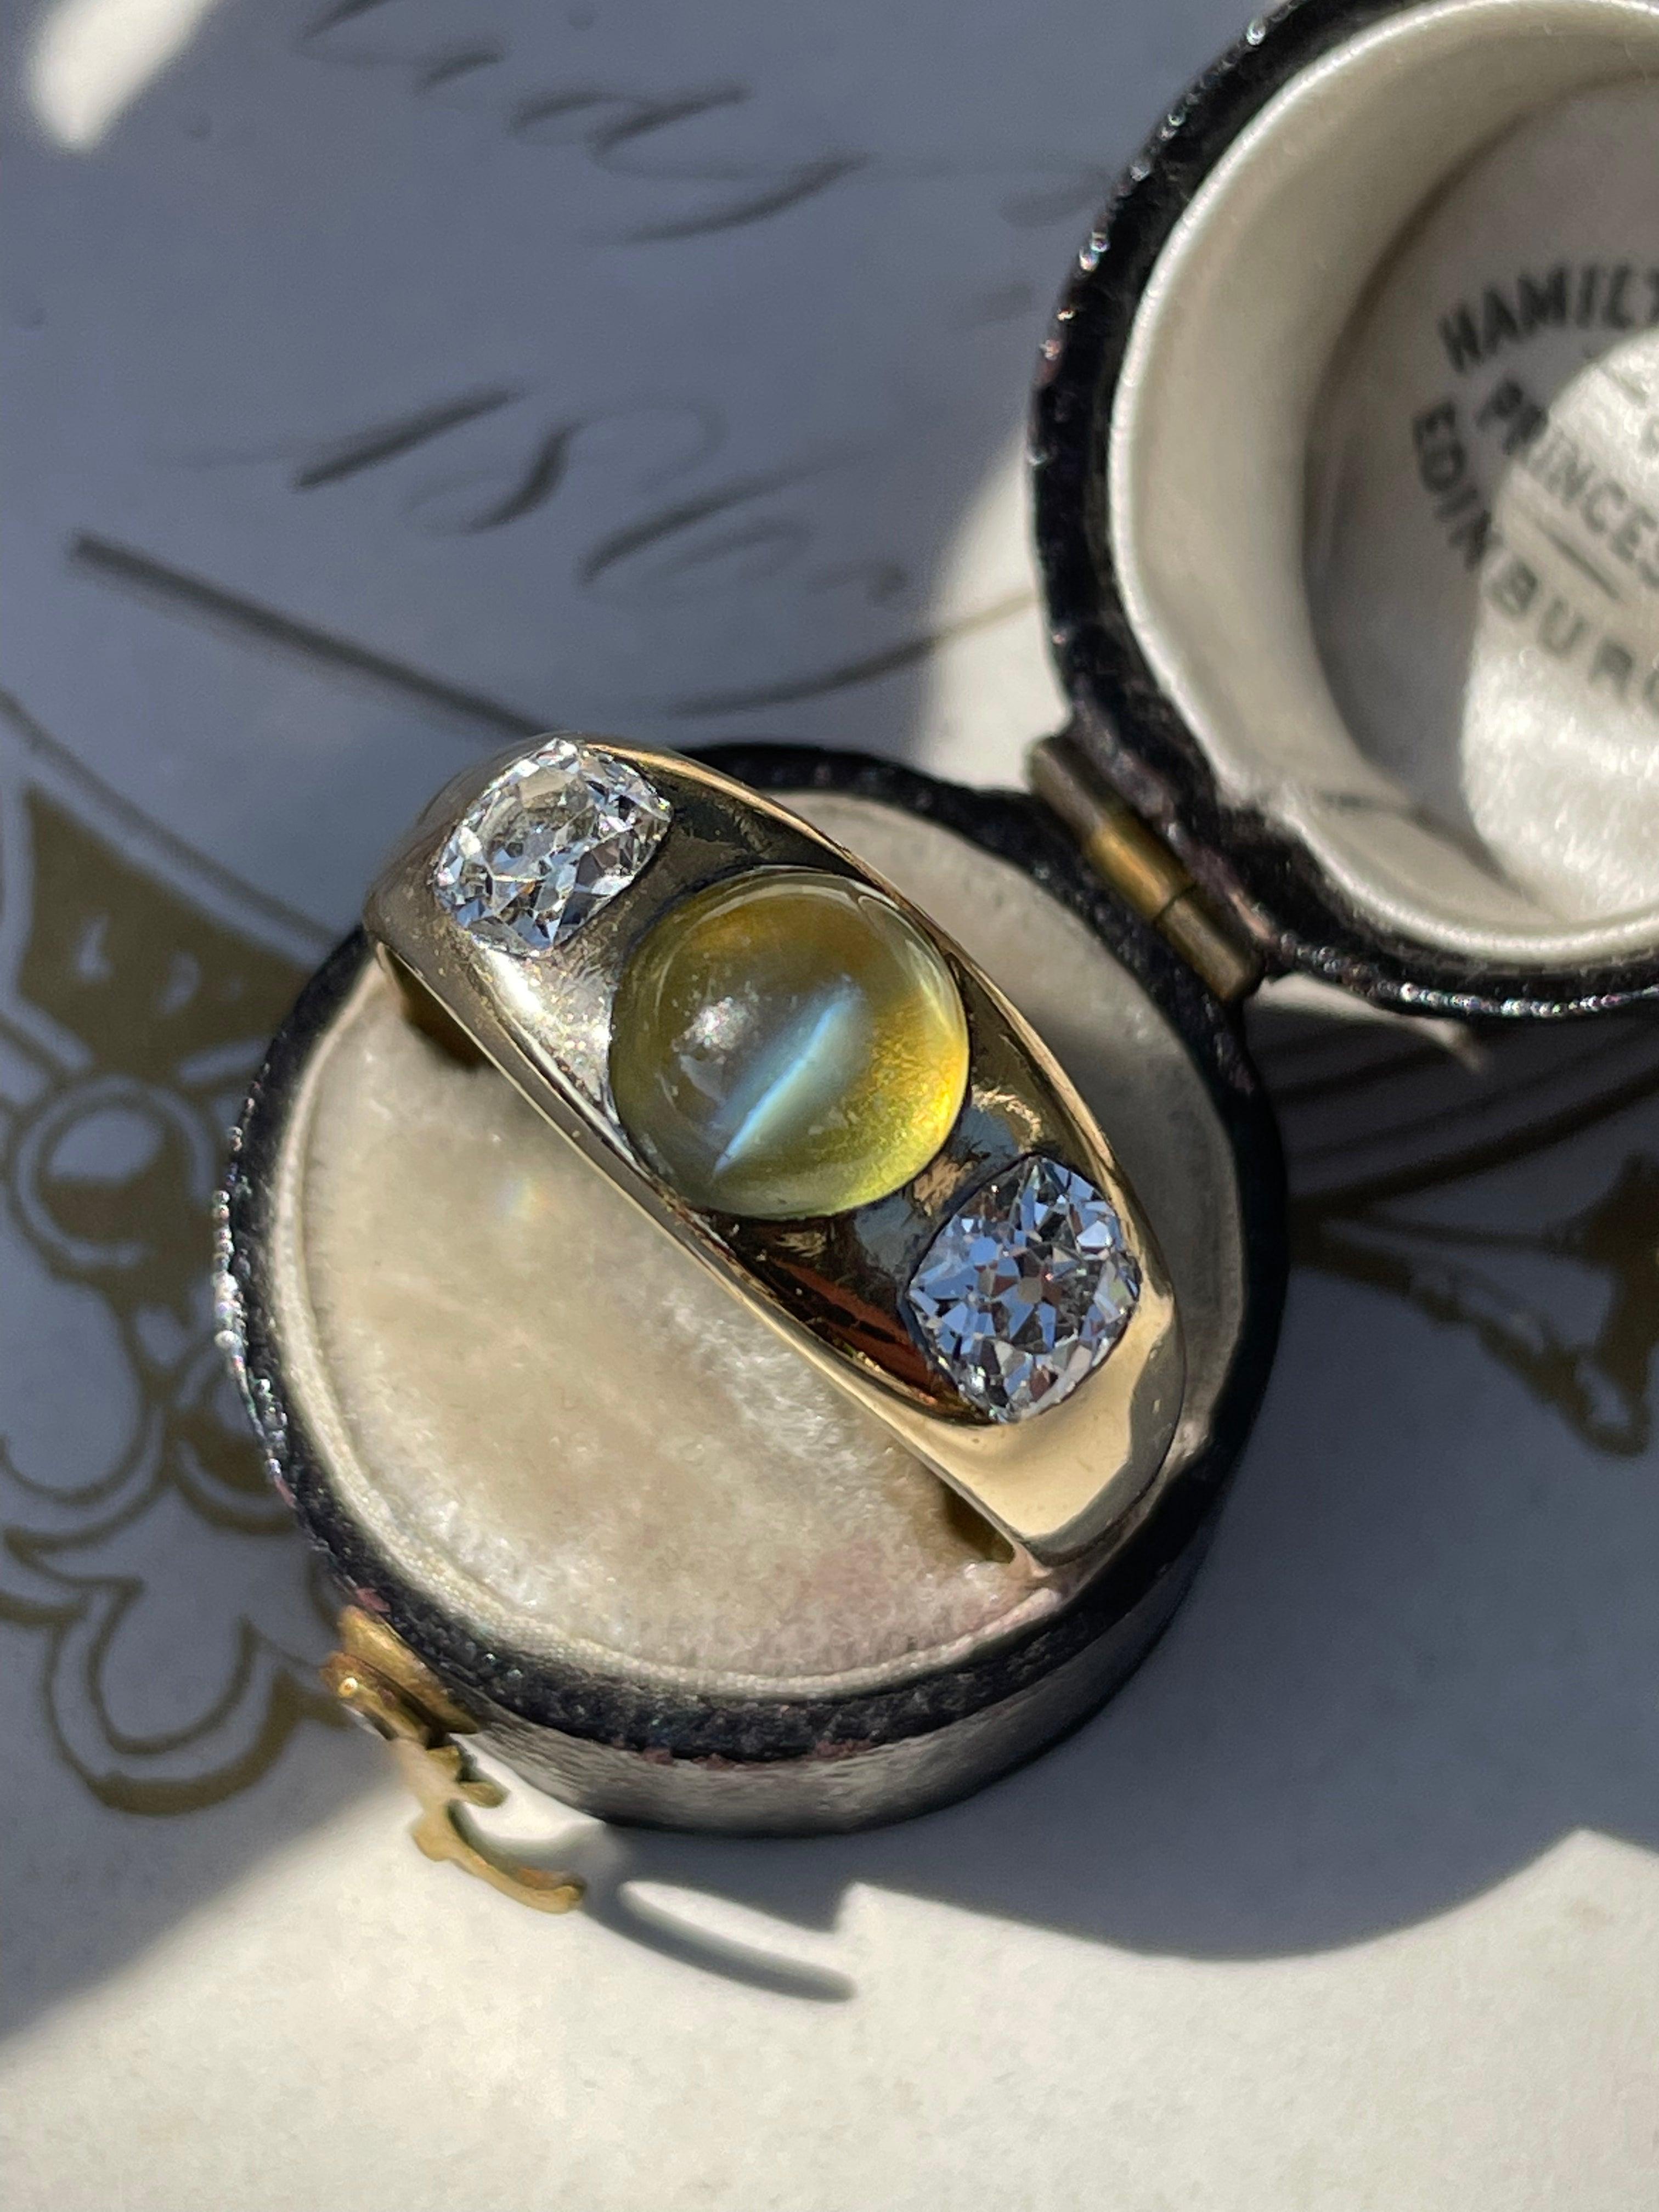 A mesmerizing honey colored cat's eye chrysoberyl, weighing 3 carats, is nestled between a pair of gorgeous old mine-cut diamonds in this exceptional antique ring. The trio is mounted in tapered 14k yellow gold rubover setting with an open back.